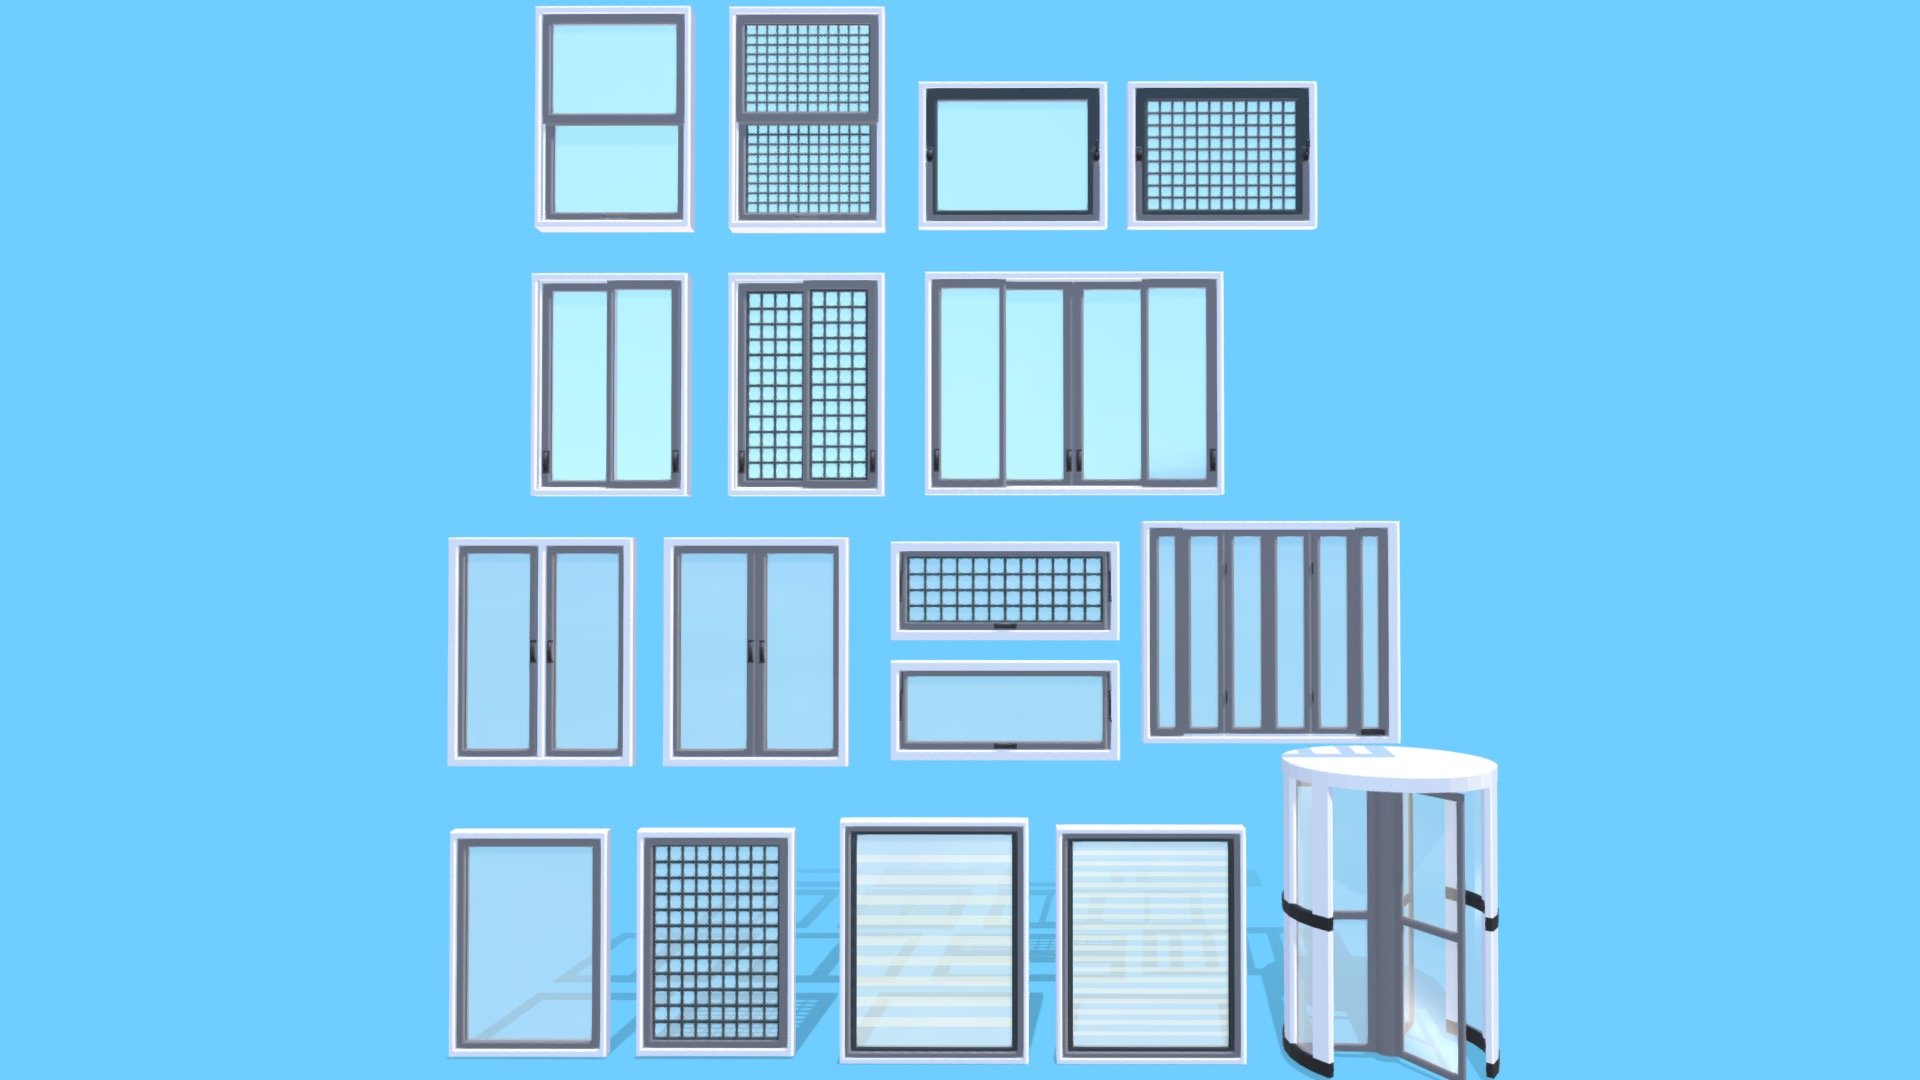 Pratice of uploading animated objects to Sketchfab.
From top left, there are ;
* single hung windows,
* horizontal pivot windows,
* single glider windows,
* double glider windows,
* double casement windows,
* awning windows,
* holding windows,
* picture windows,
* jalousie windows, and
* revolving door.

No texture but UV mapped for future use.
Lowpoly.
Made with Blender 3d model